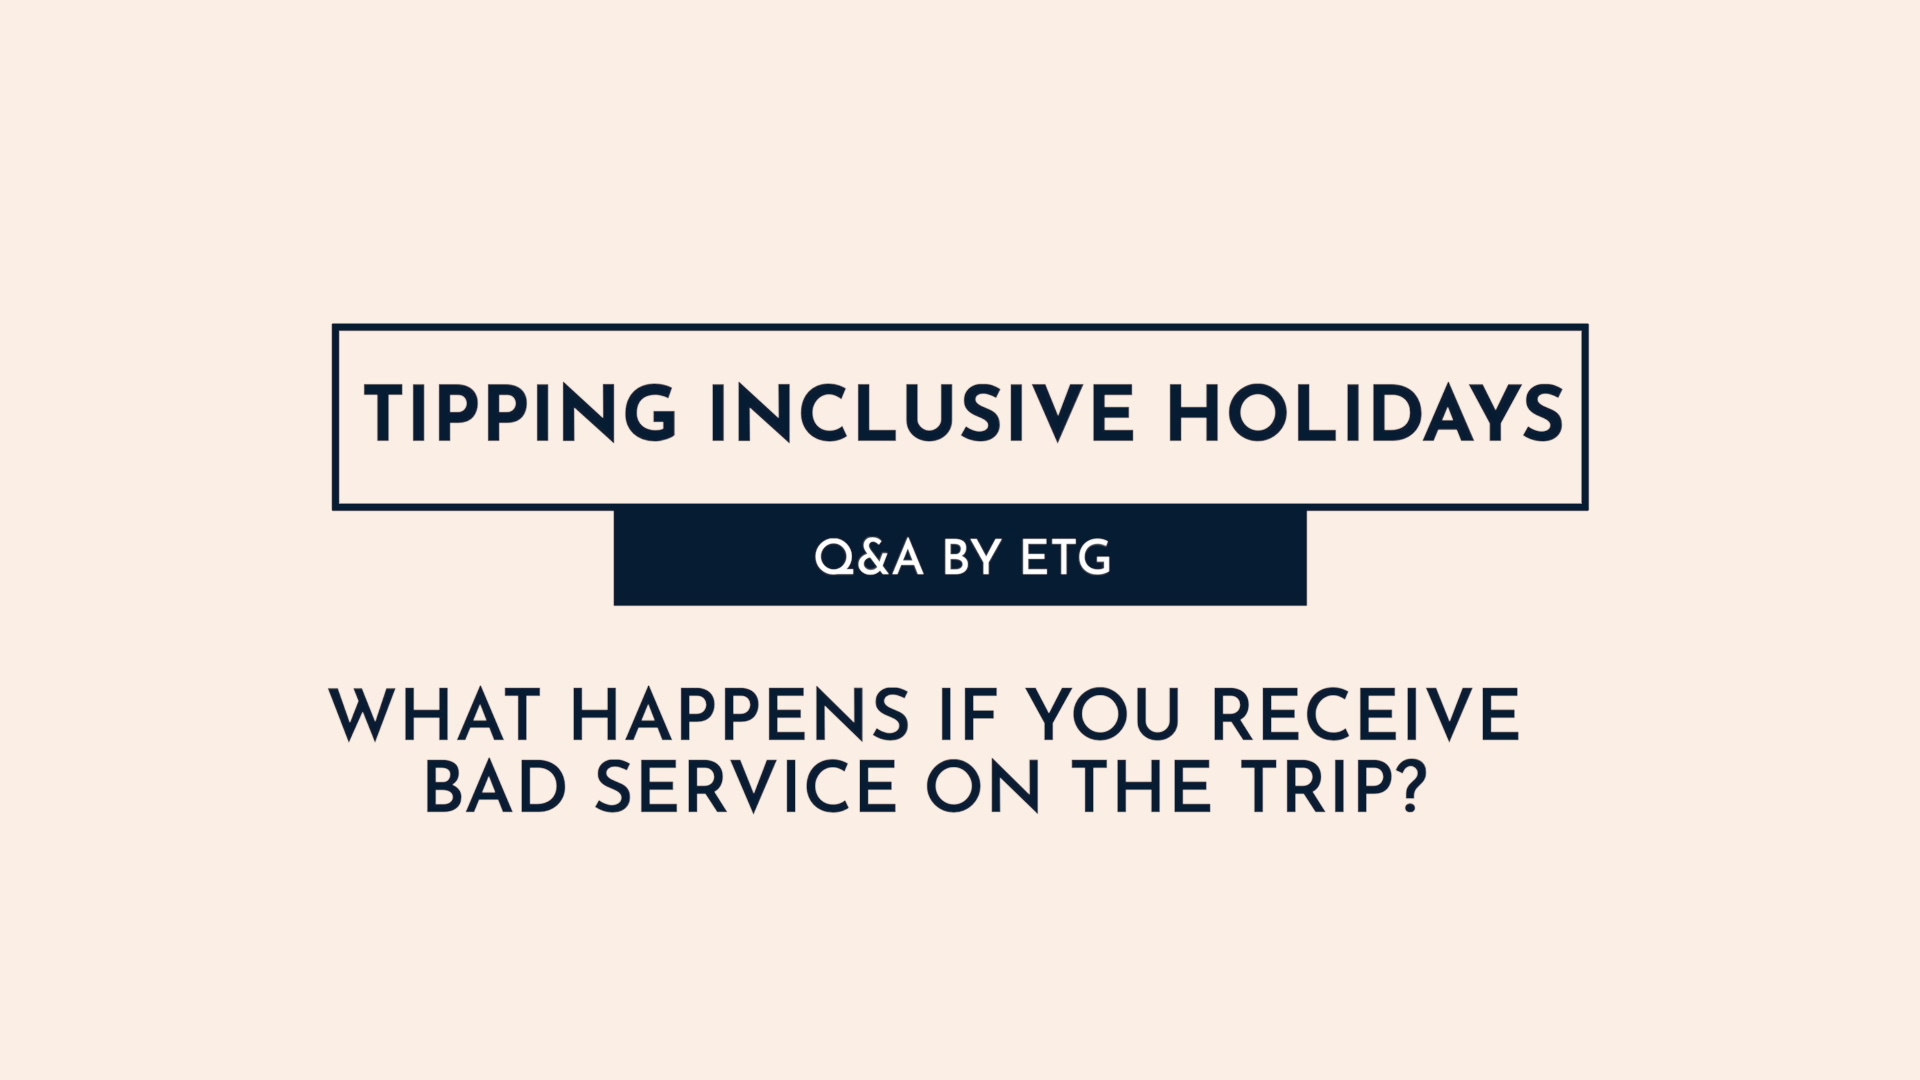 5 - What happens if you recieve bad service on your holiday